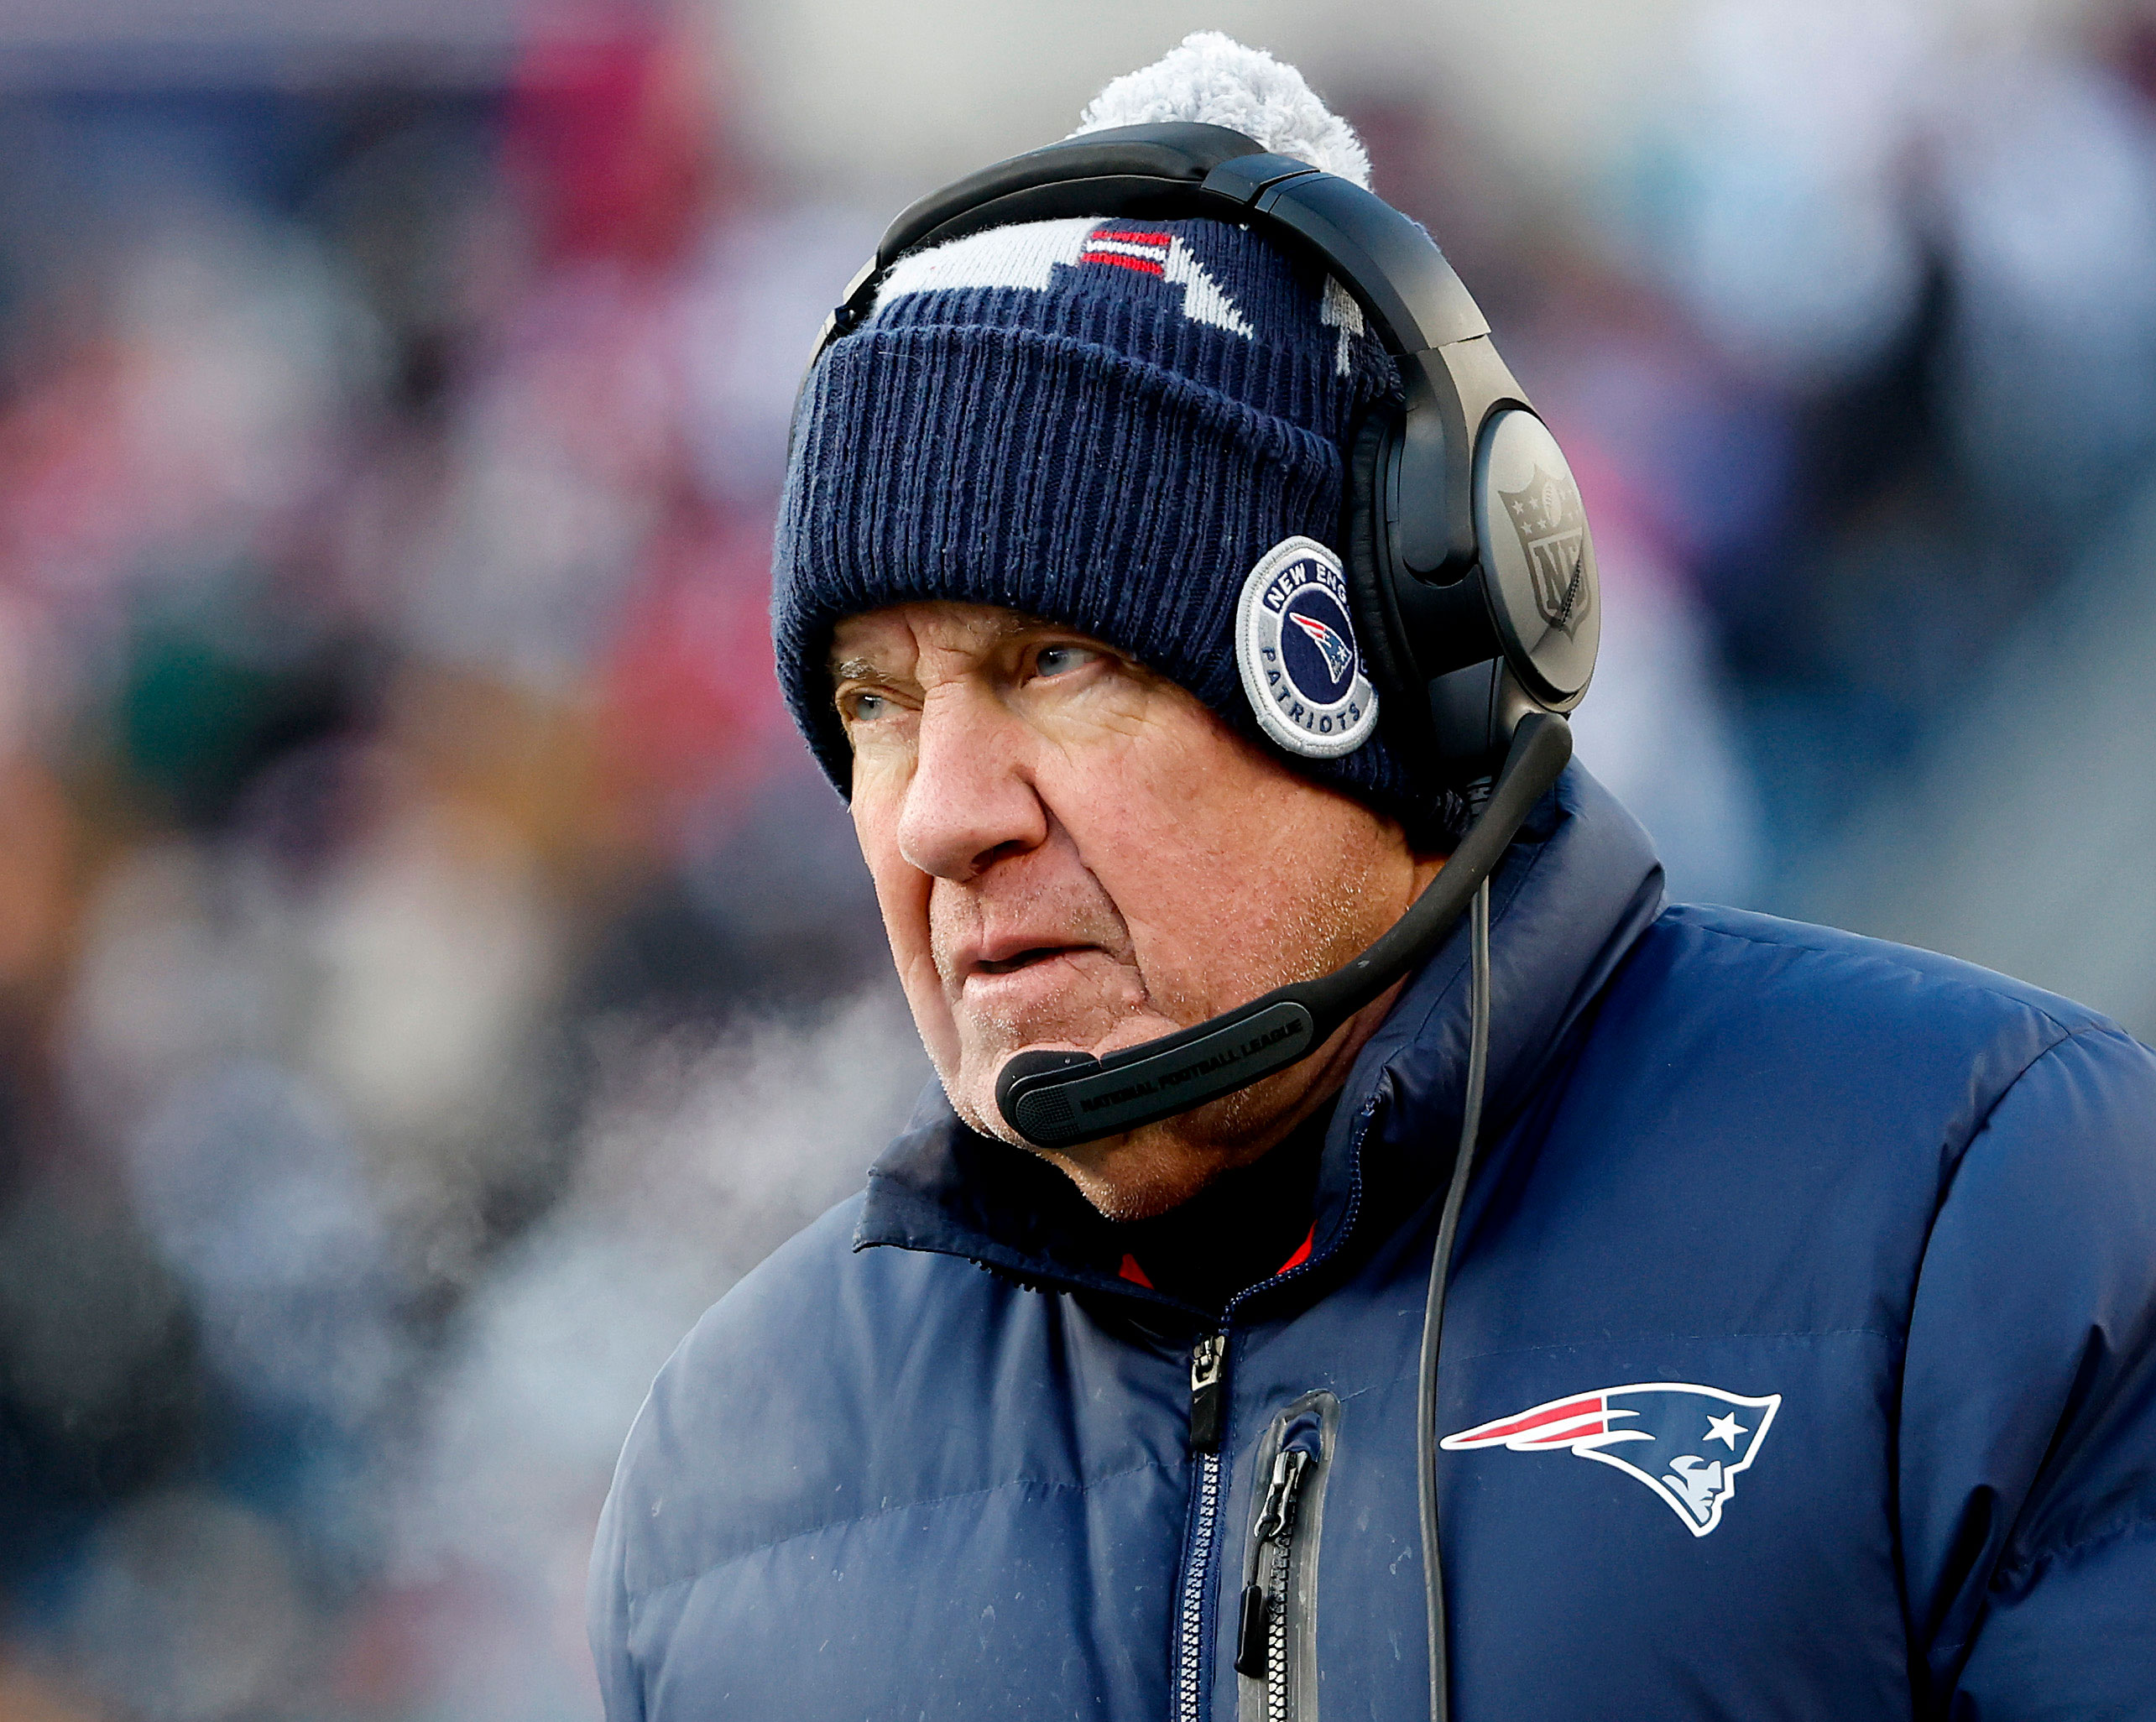 New England Patriots head coach Bill Belichick watches the second half of the Patriots' game against the Cincinnati Bengals on December 24 in Foxborough, Massachusetts.